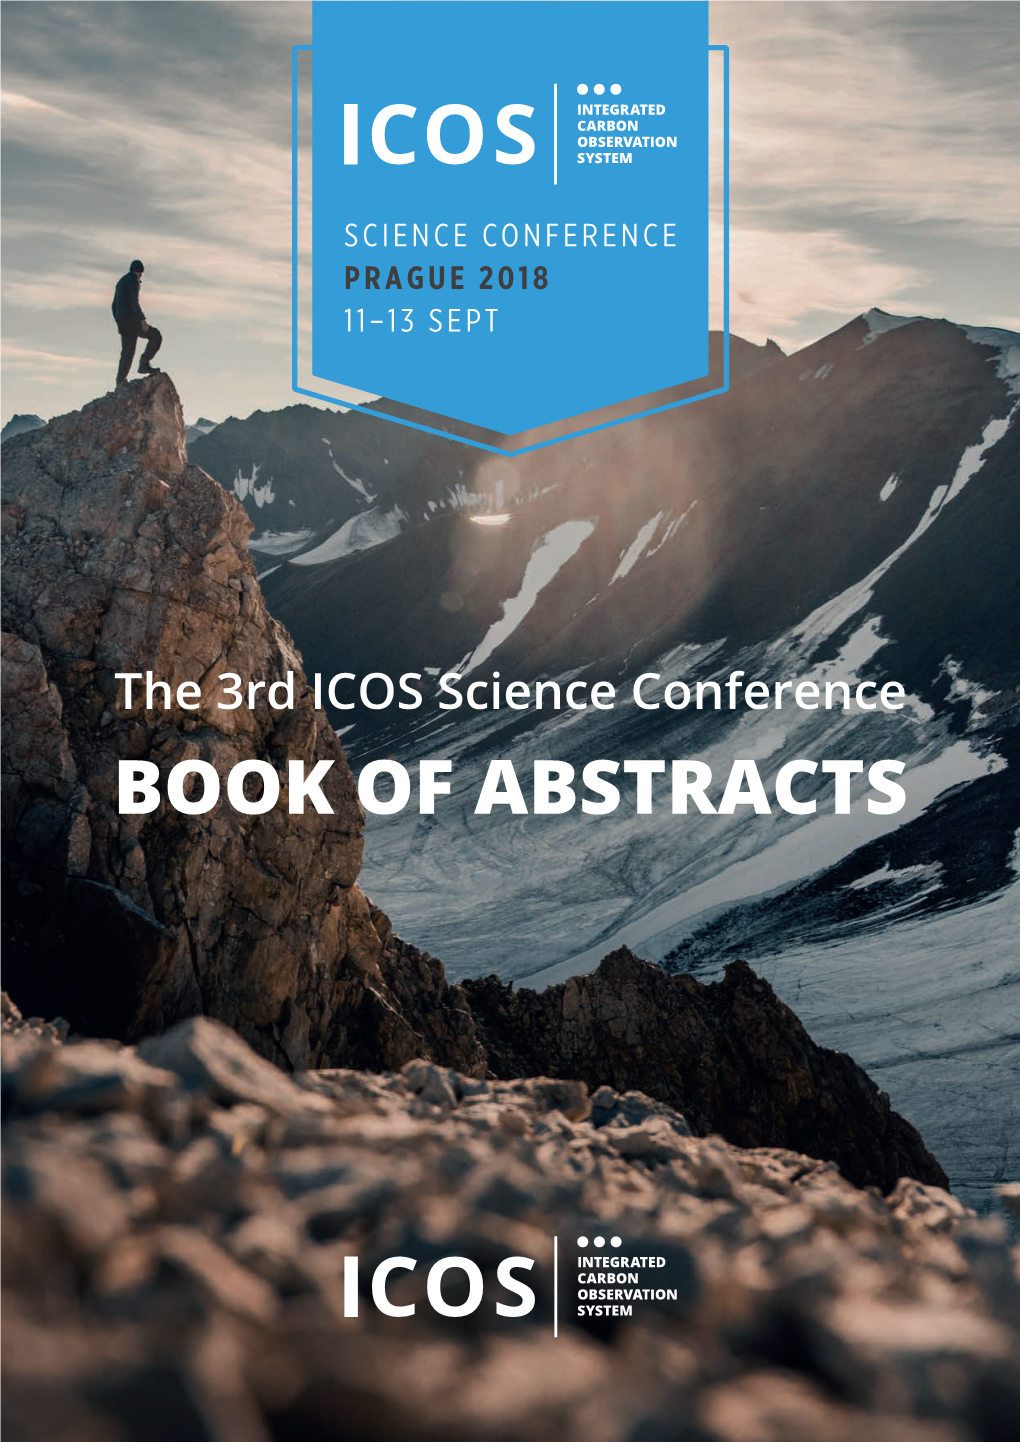 Download the Book of Abstracts